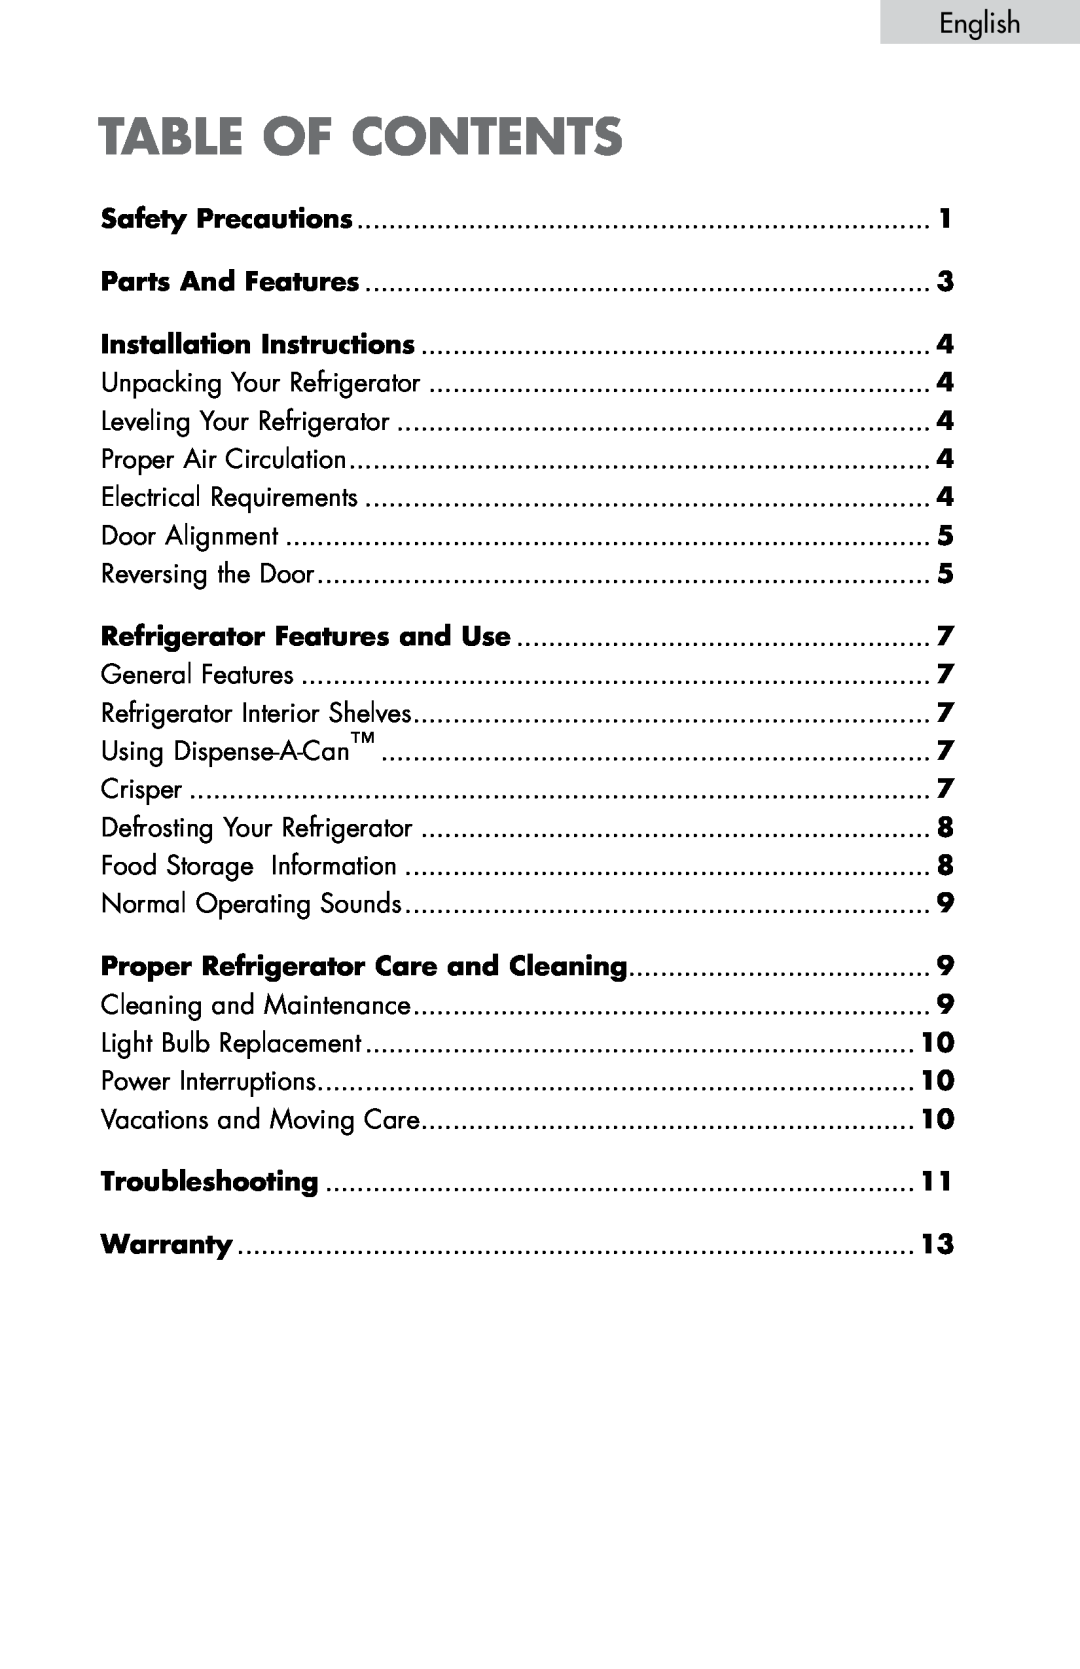 Haier HNDE03VS manual table of contents, English, Proper Refrigerator Care and Cleaning 